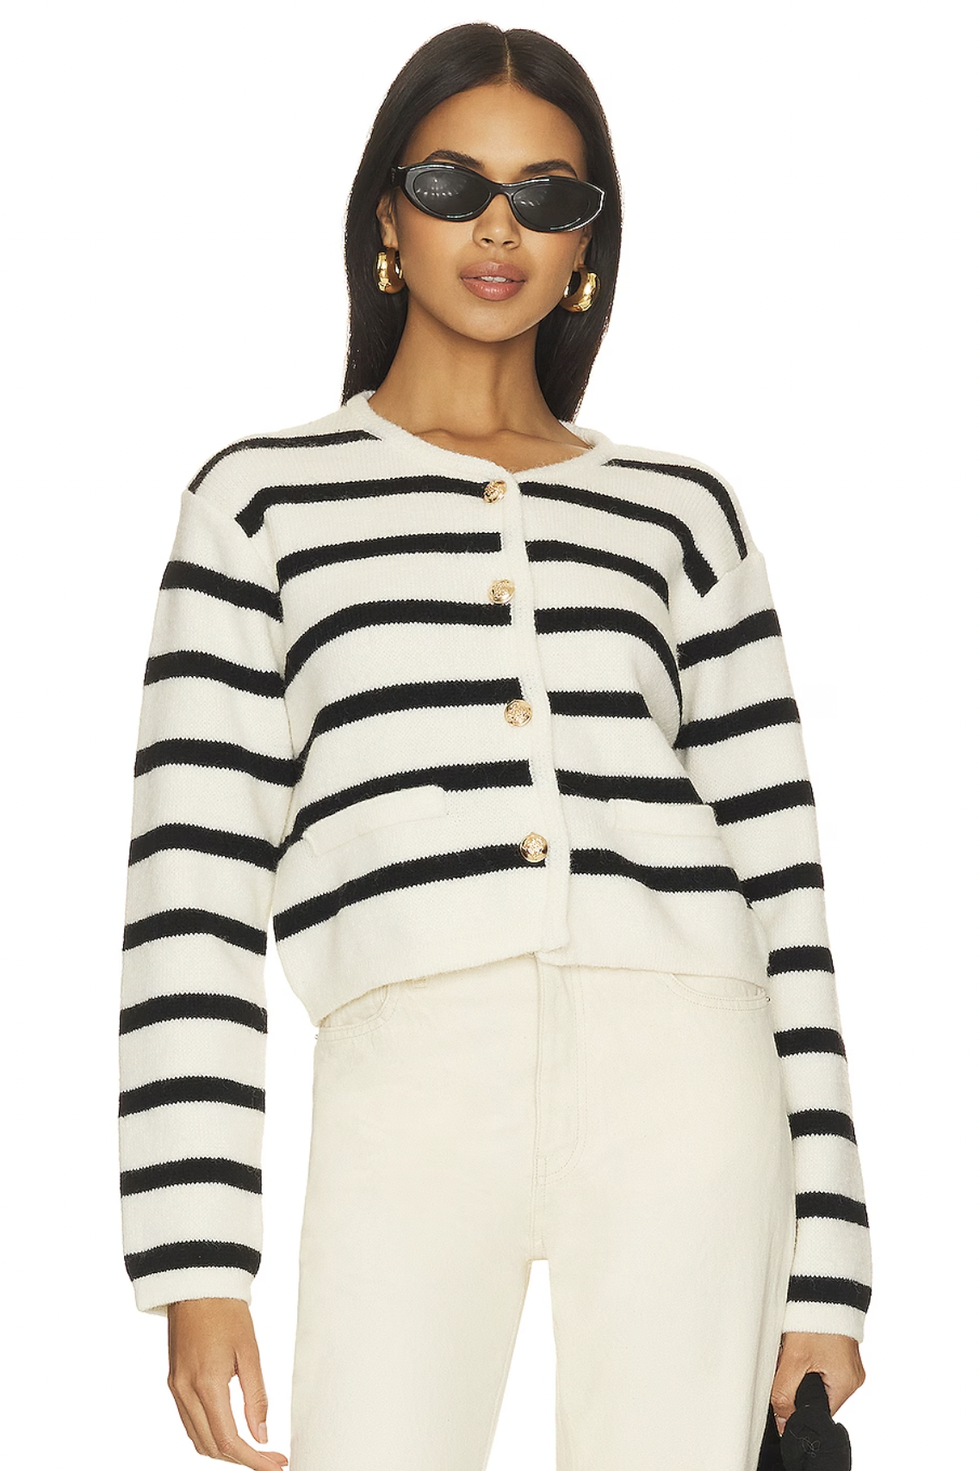 The collared striped sweater is trending right now - shop our favourites